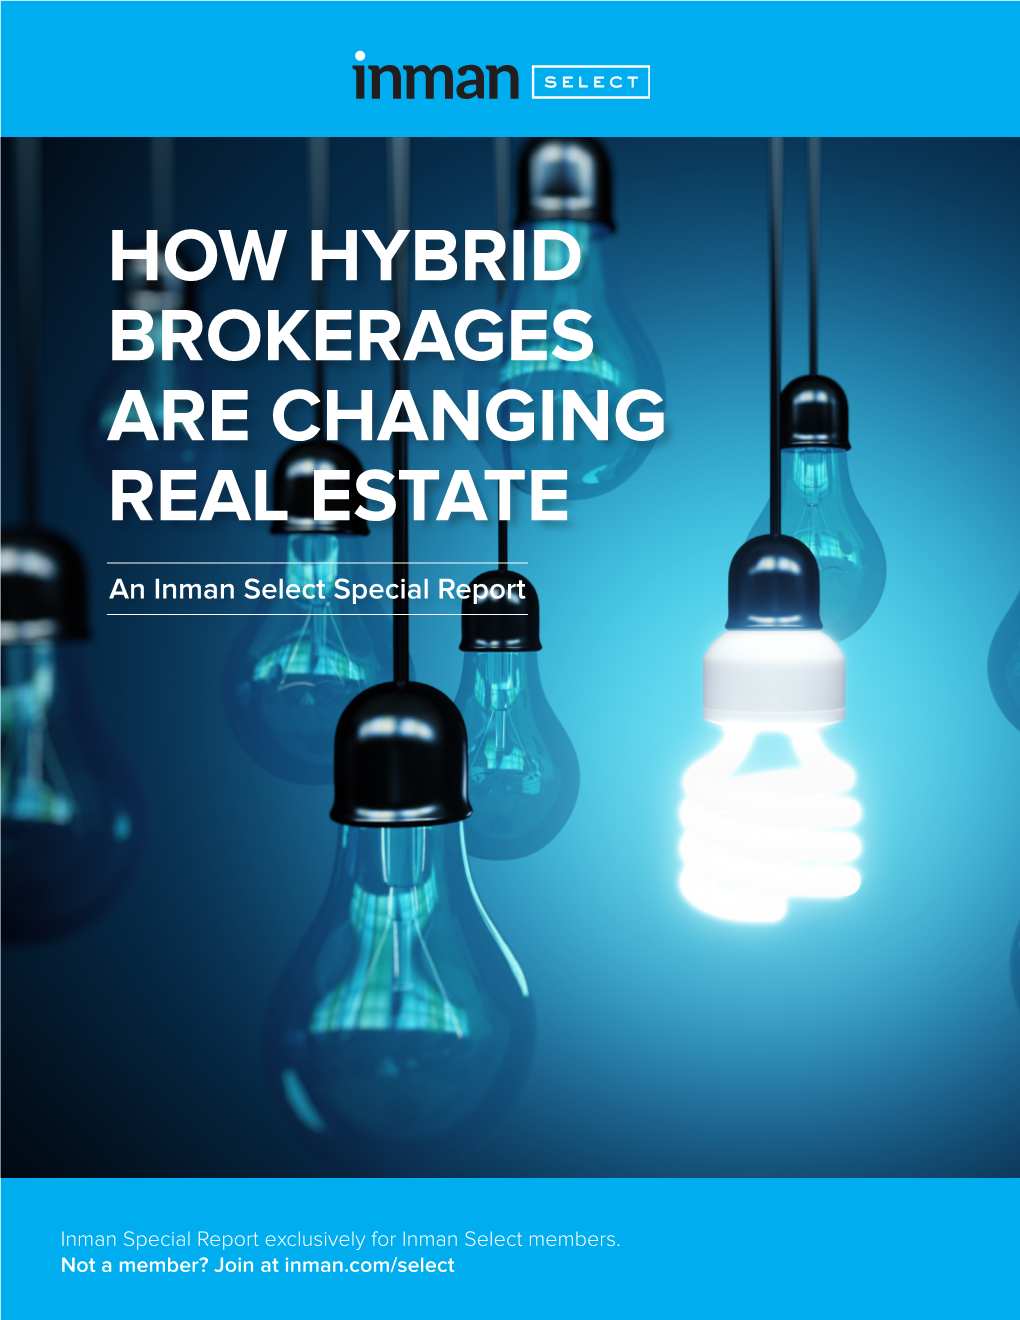 How Hybrid Brokerages Are Changing Real Estate